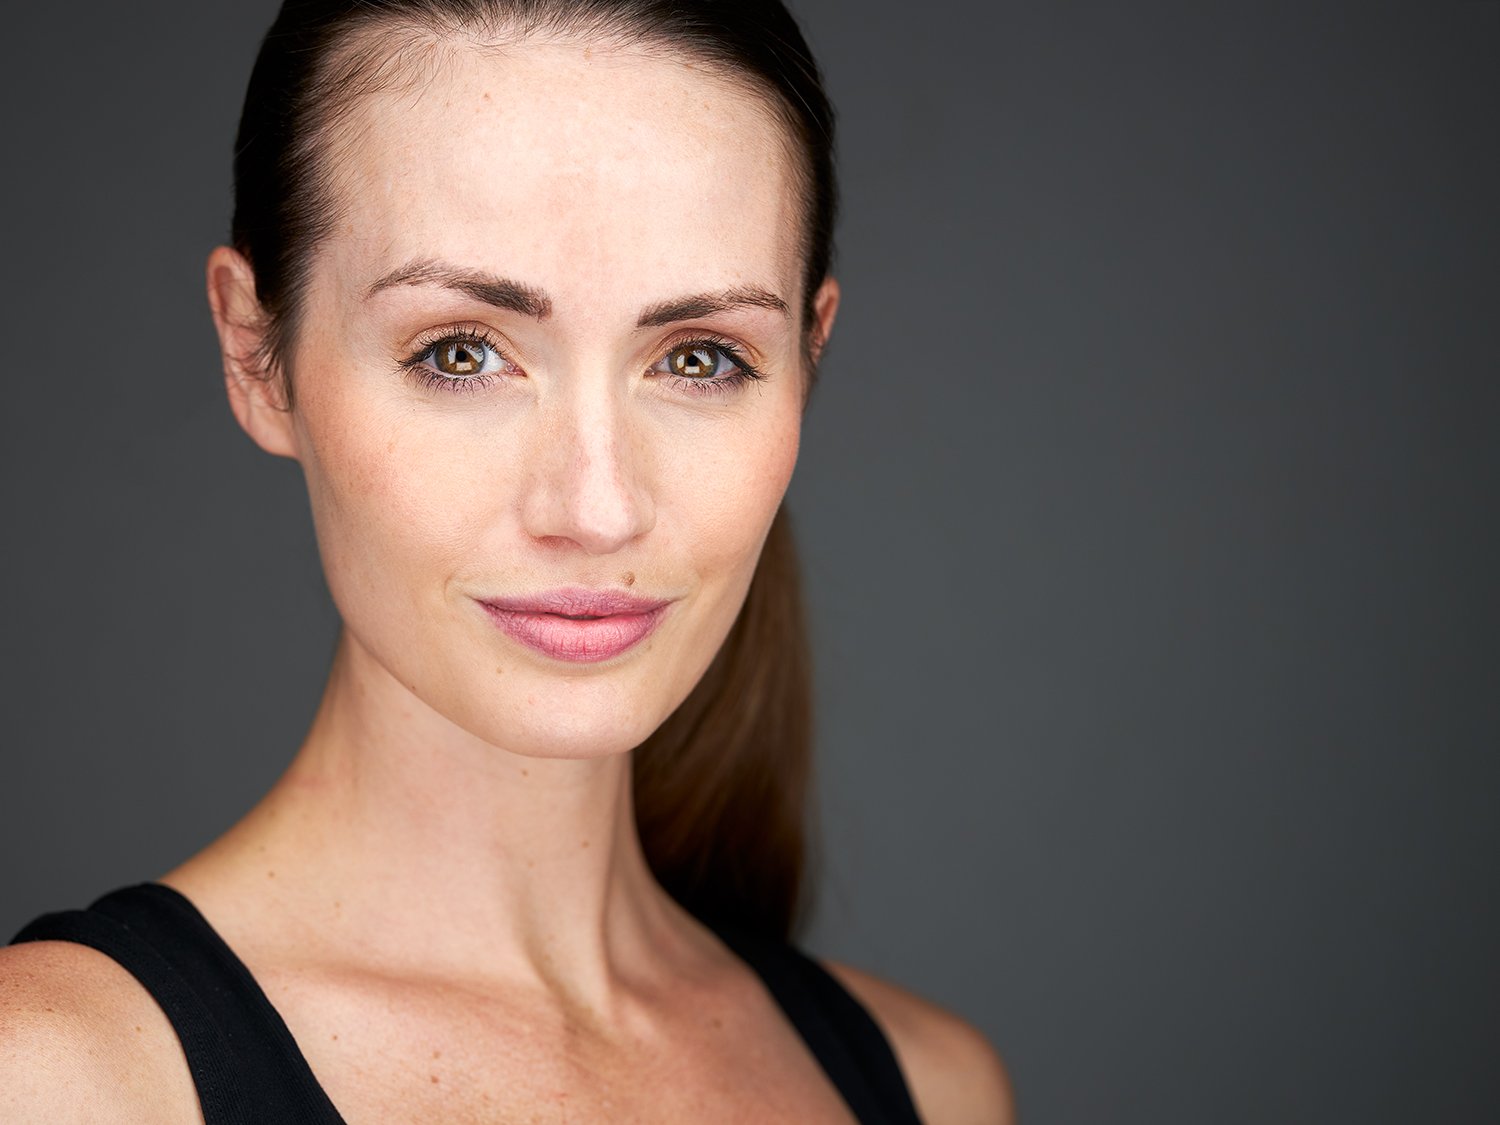 Tips for Posing in a Professional Headshot